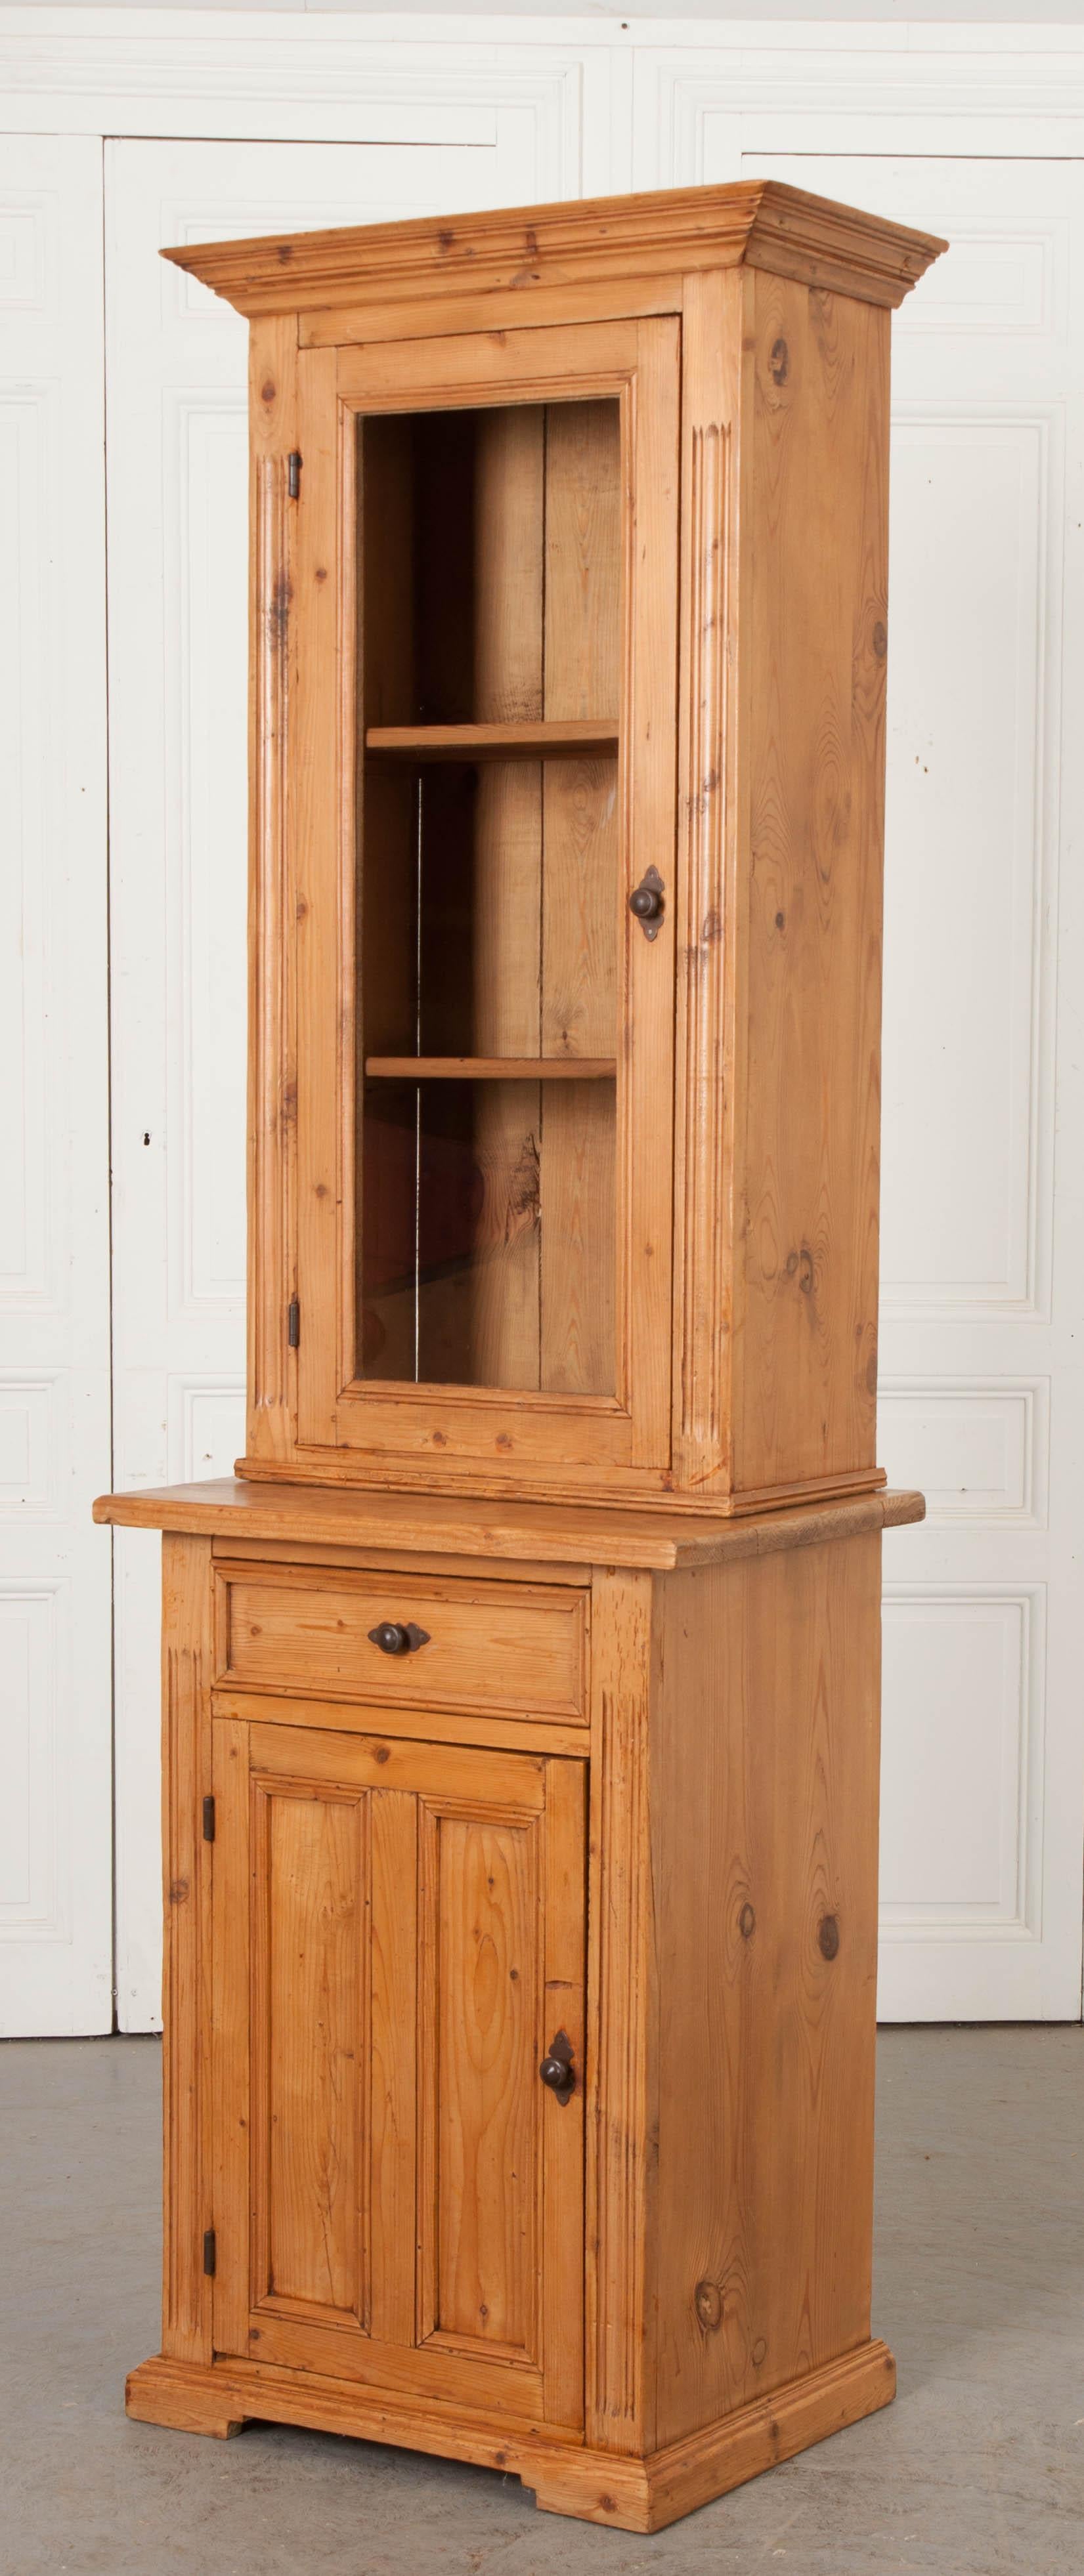 This charming narrow carved pine cabinet, circa 1880s, is from the Netherlands and features a well-carved cornice over an upper case having carved shoulders and a glazed and beaded door through which a pair of fixed shelves can be seen. The base has